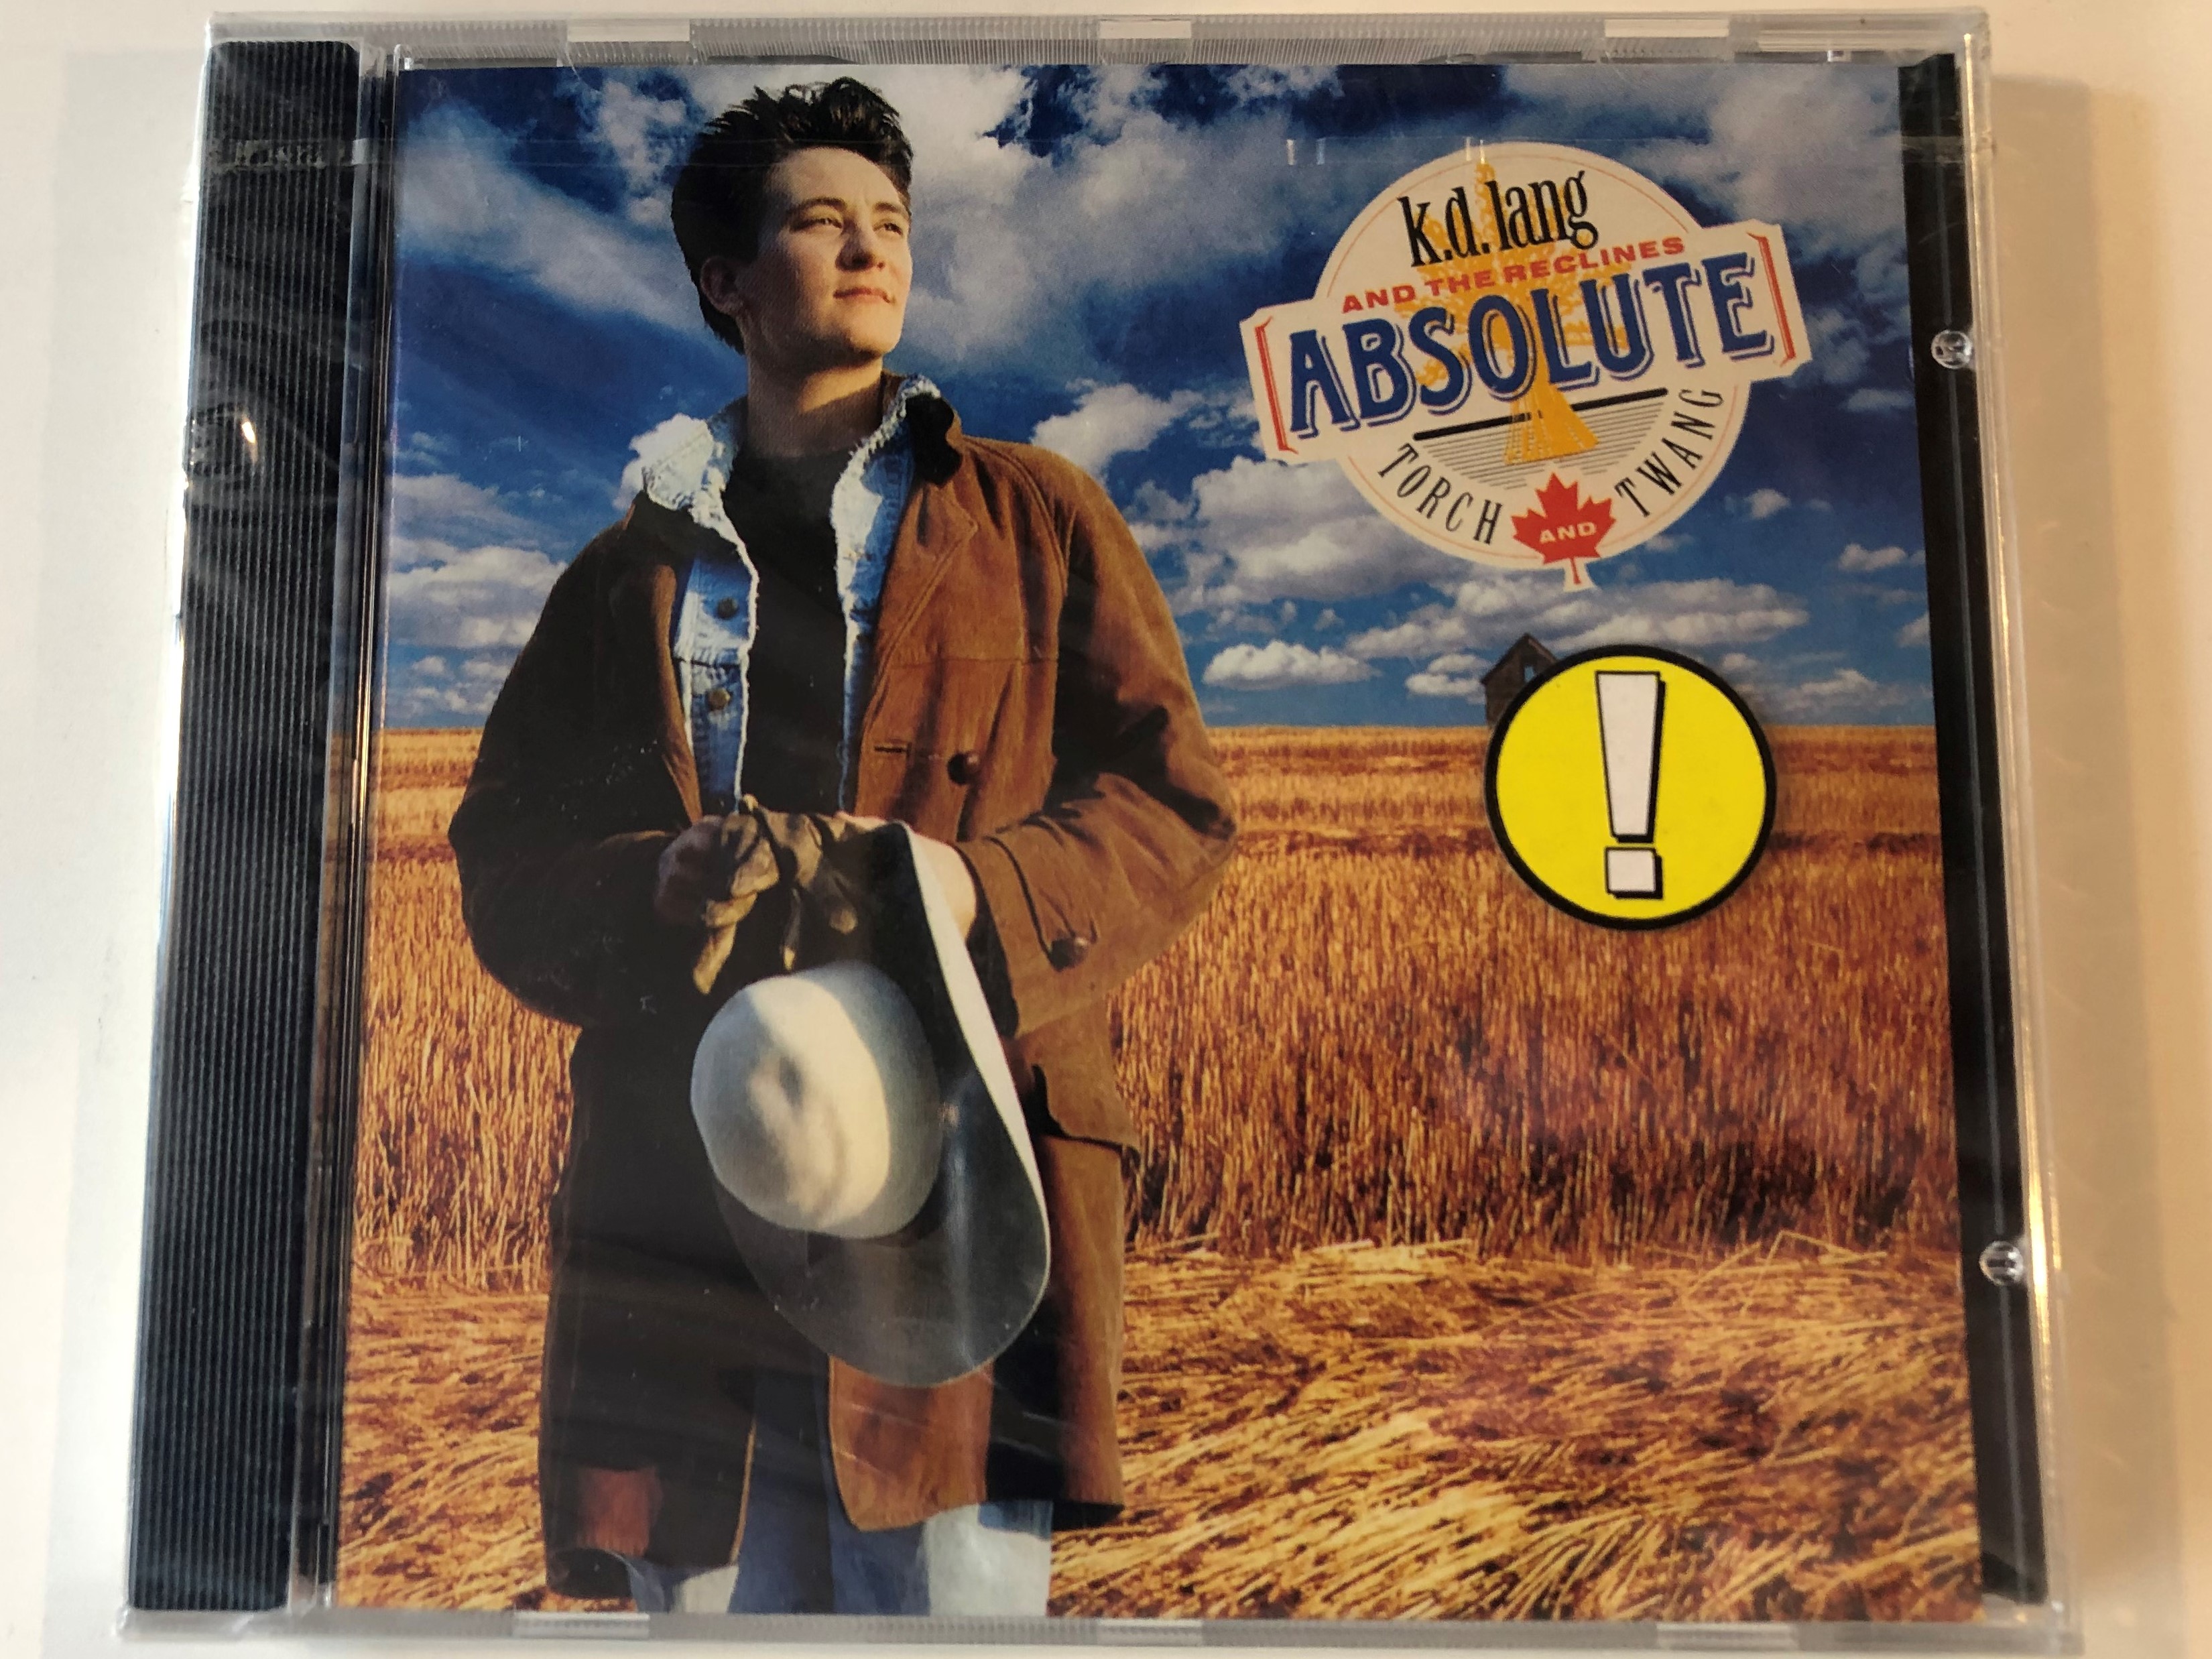 k-.d.-lang-and-the-reclines-absolute-torch-and-twang-sire-audio-cd-1989-07599-25877-23-1-.jpg